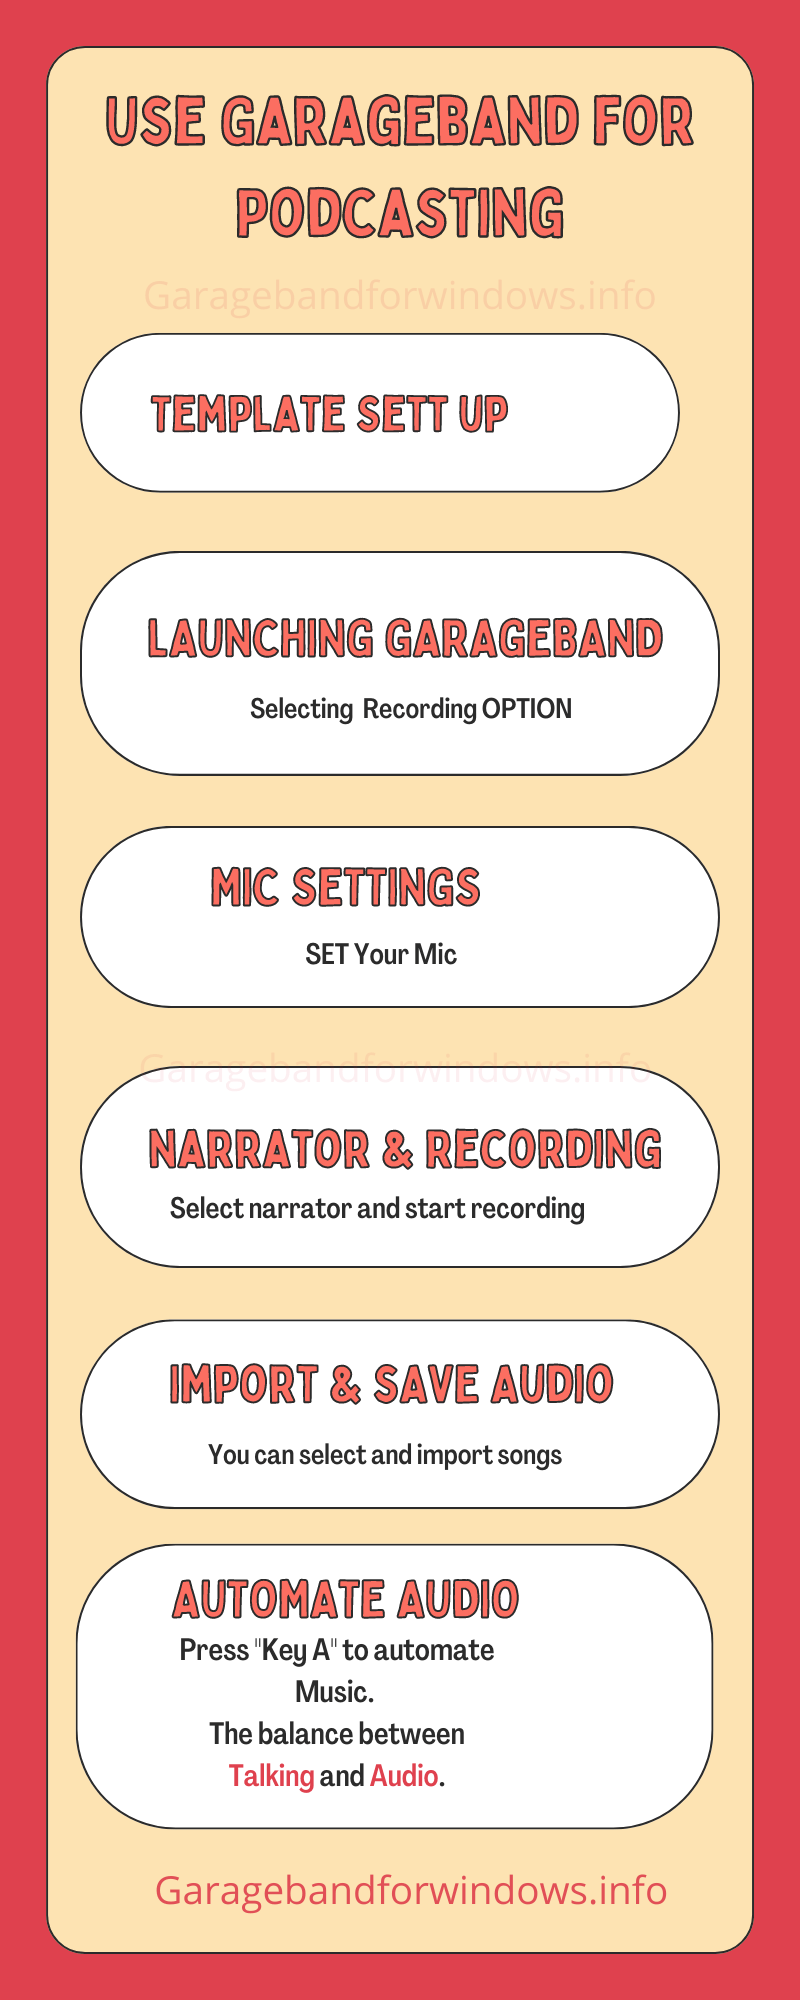 How to Use Garageband for Podcasting on ipad mac and pc?